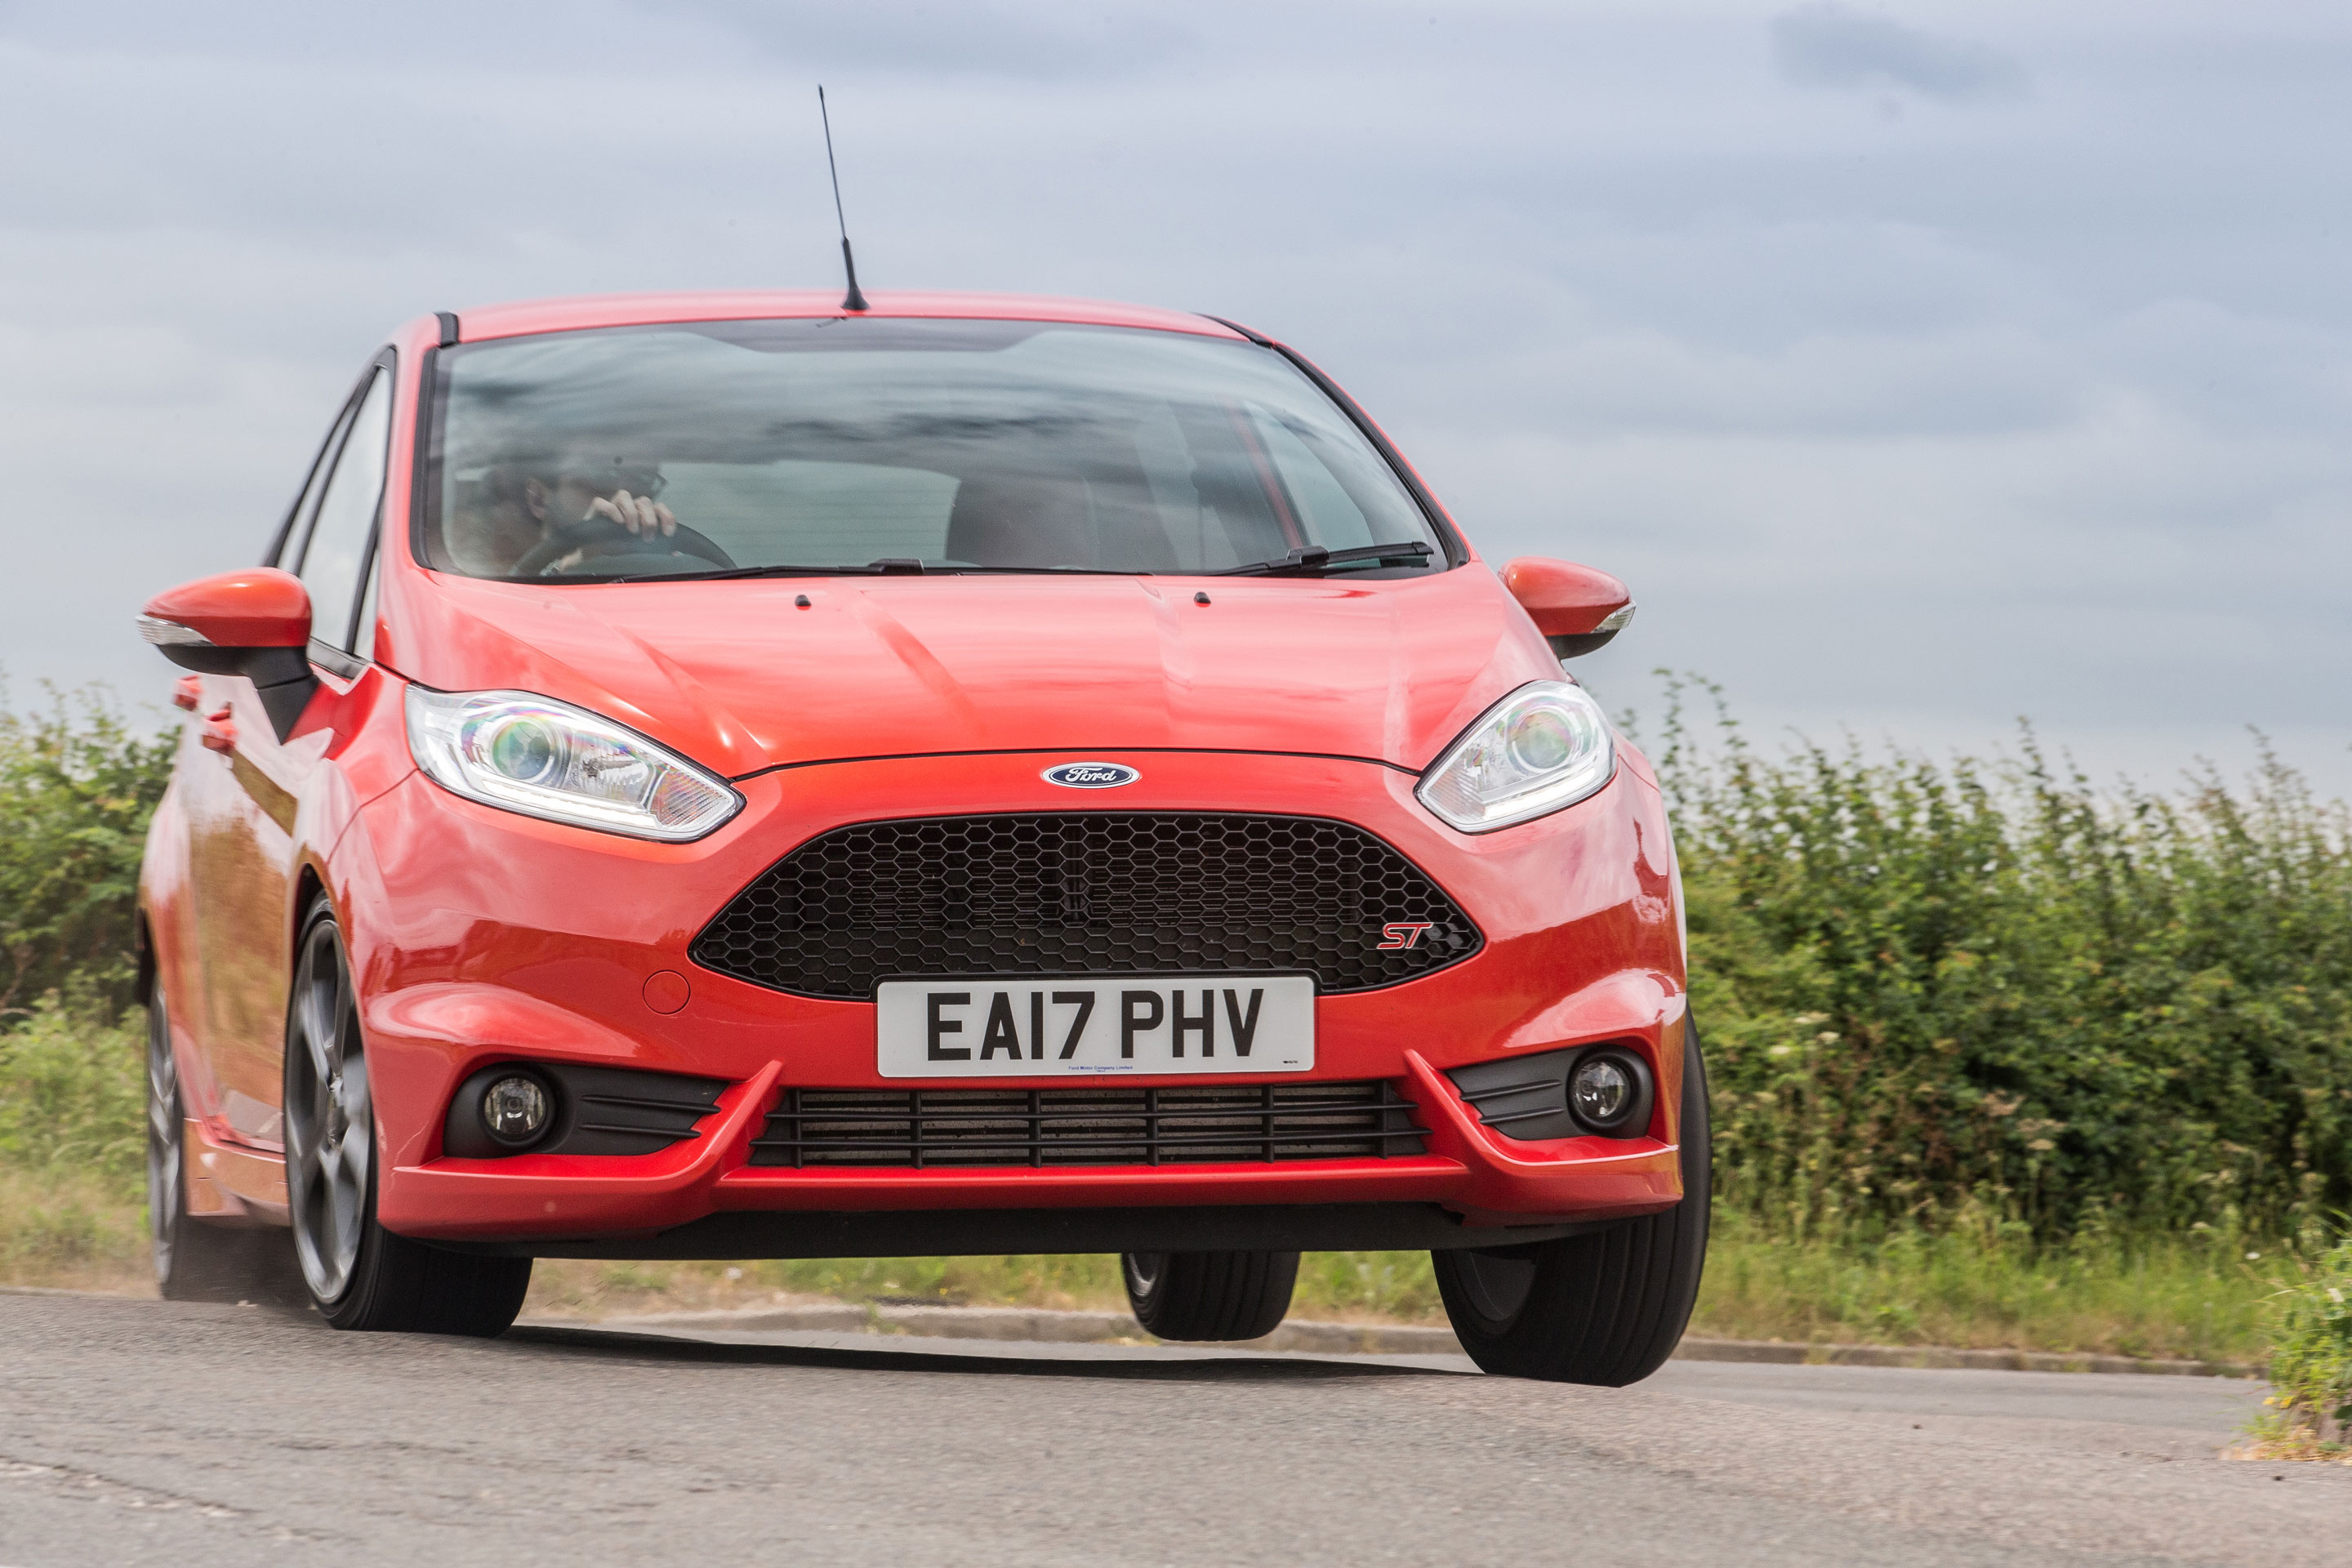 Ford Fiesta ST Mk7 review (2013-2017) – ride and handling